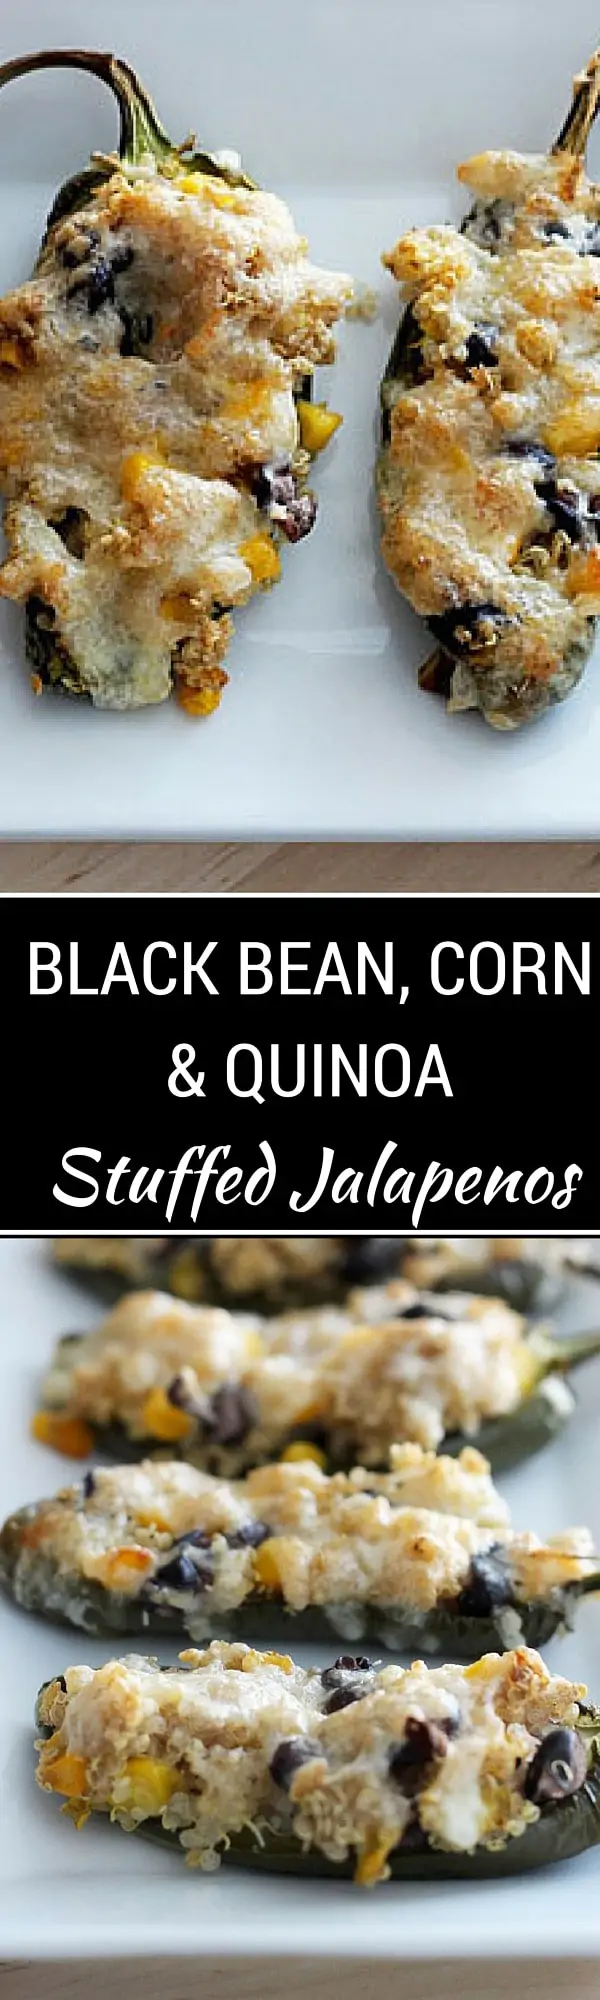 Black Bean, Corn & Quinoa Stuffed Jalapenos - These easy to make jalapeno poppers are yummy and healthy! The perfect appetizer to help you keep your health goals on track! - WendyPolisi.com